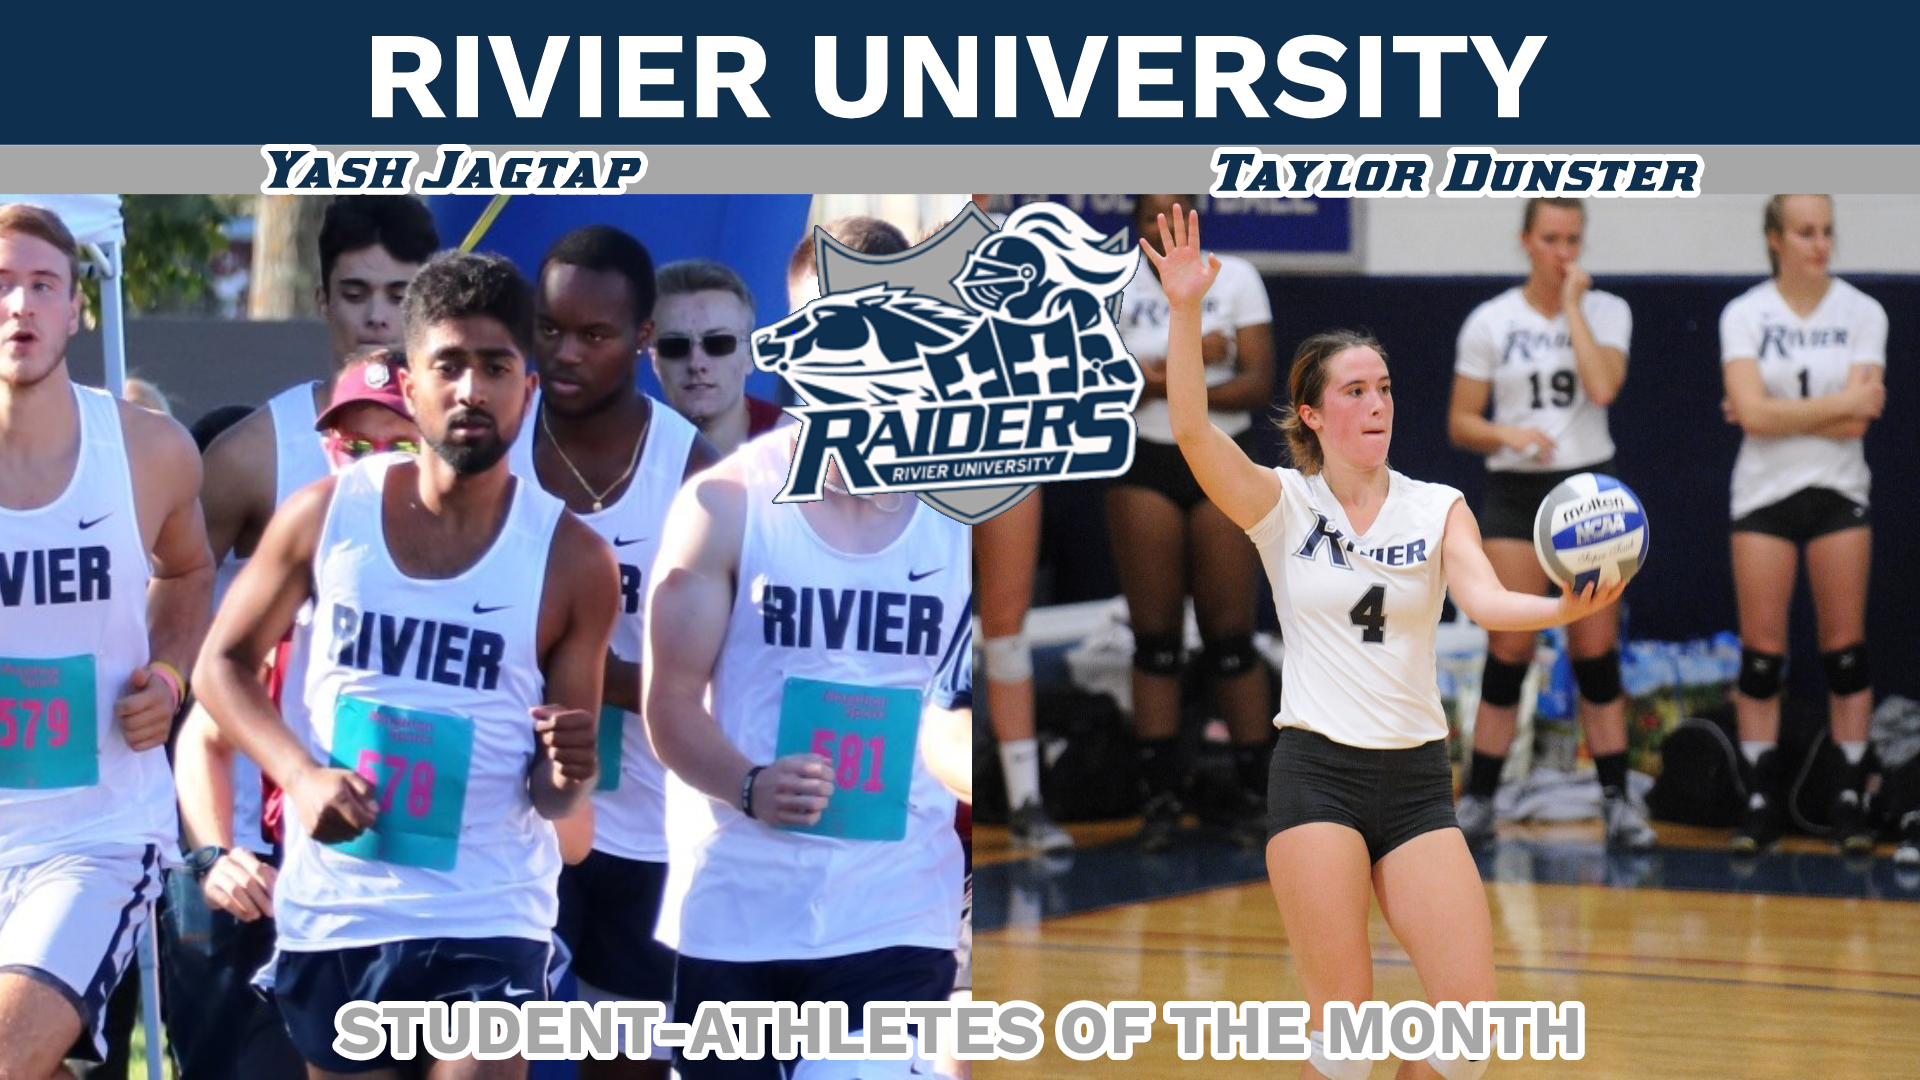 Dunster, Jagtap named Student-Athletes of the Month